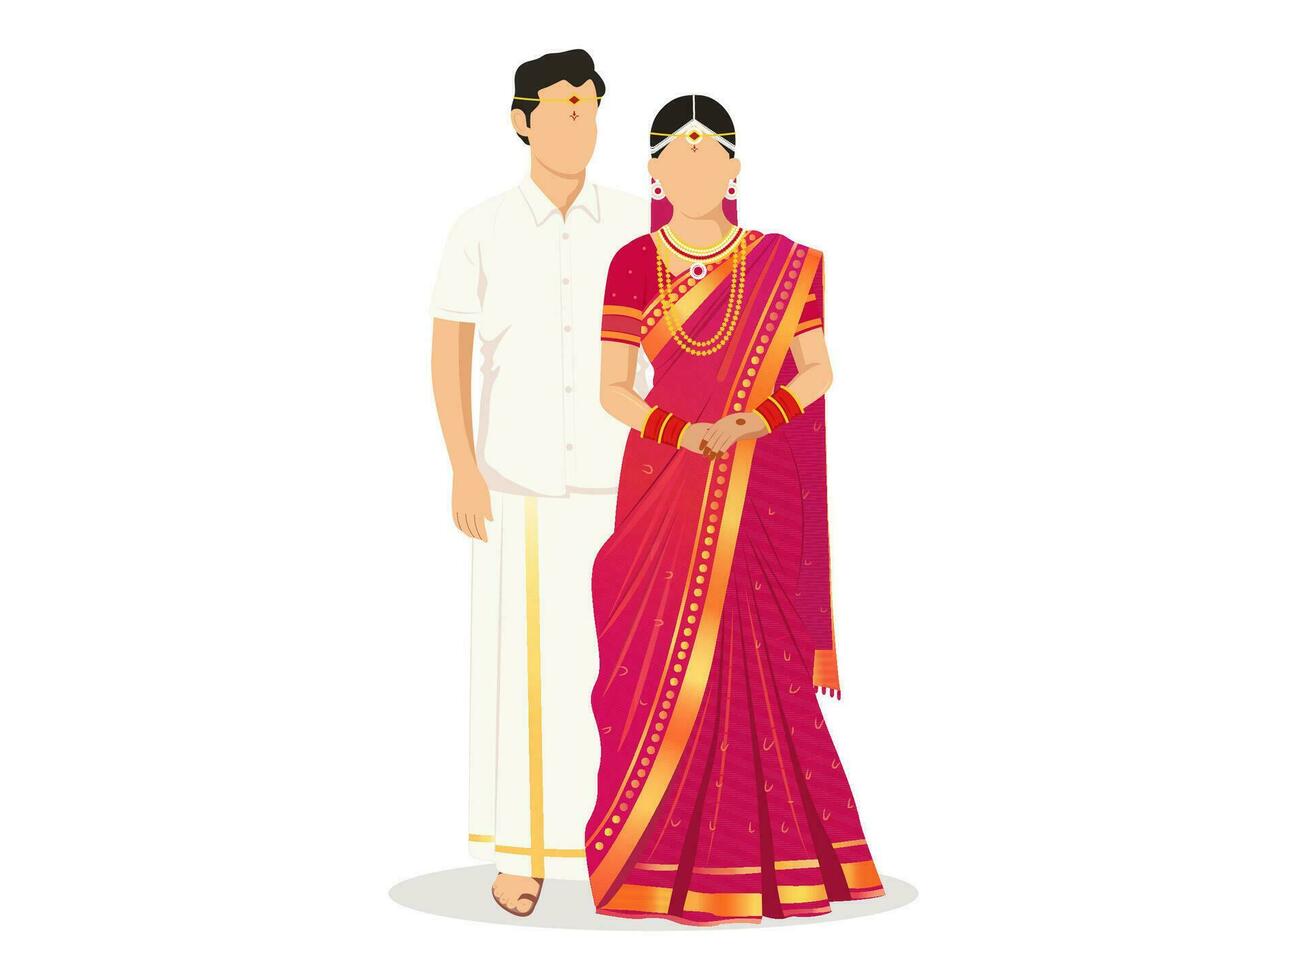 Faceless South Indian Wedding Couple Character Standing in Saree and Veshti According to Their Culture. vector